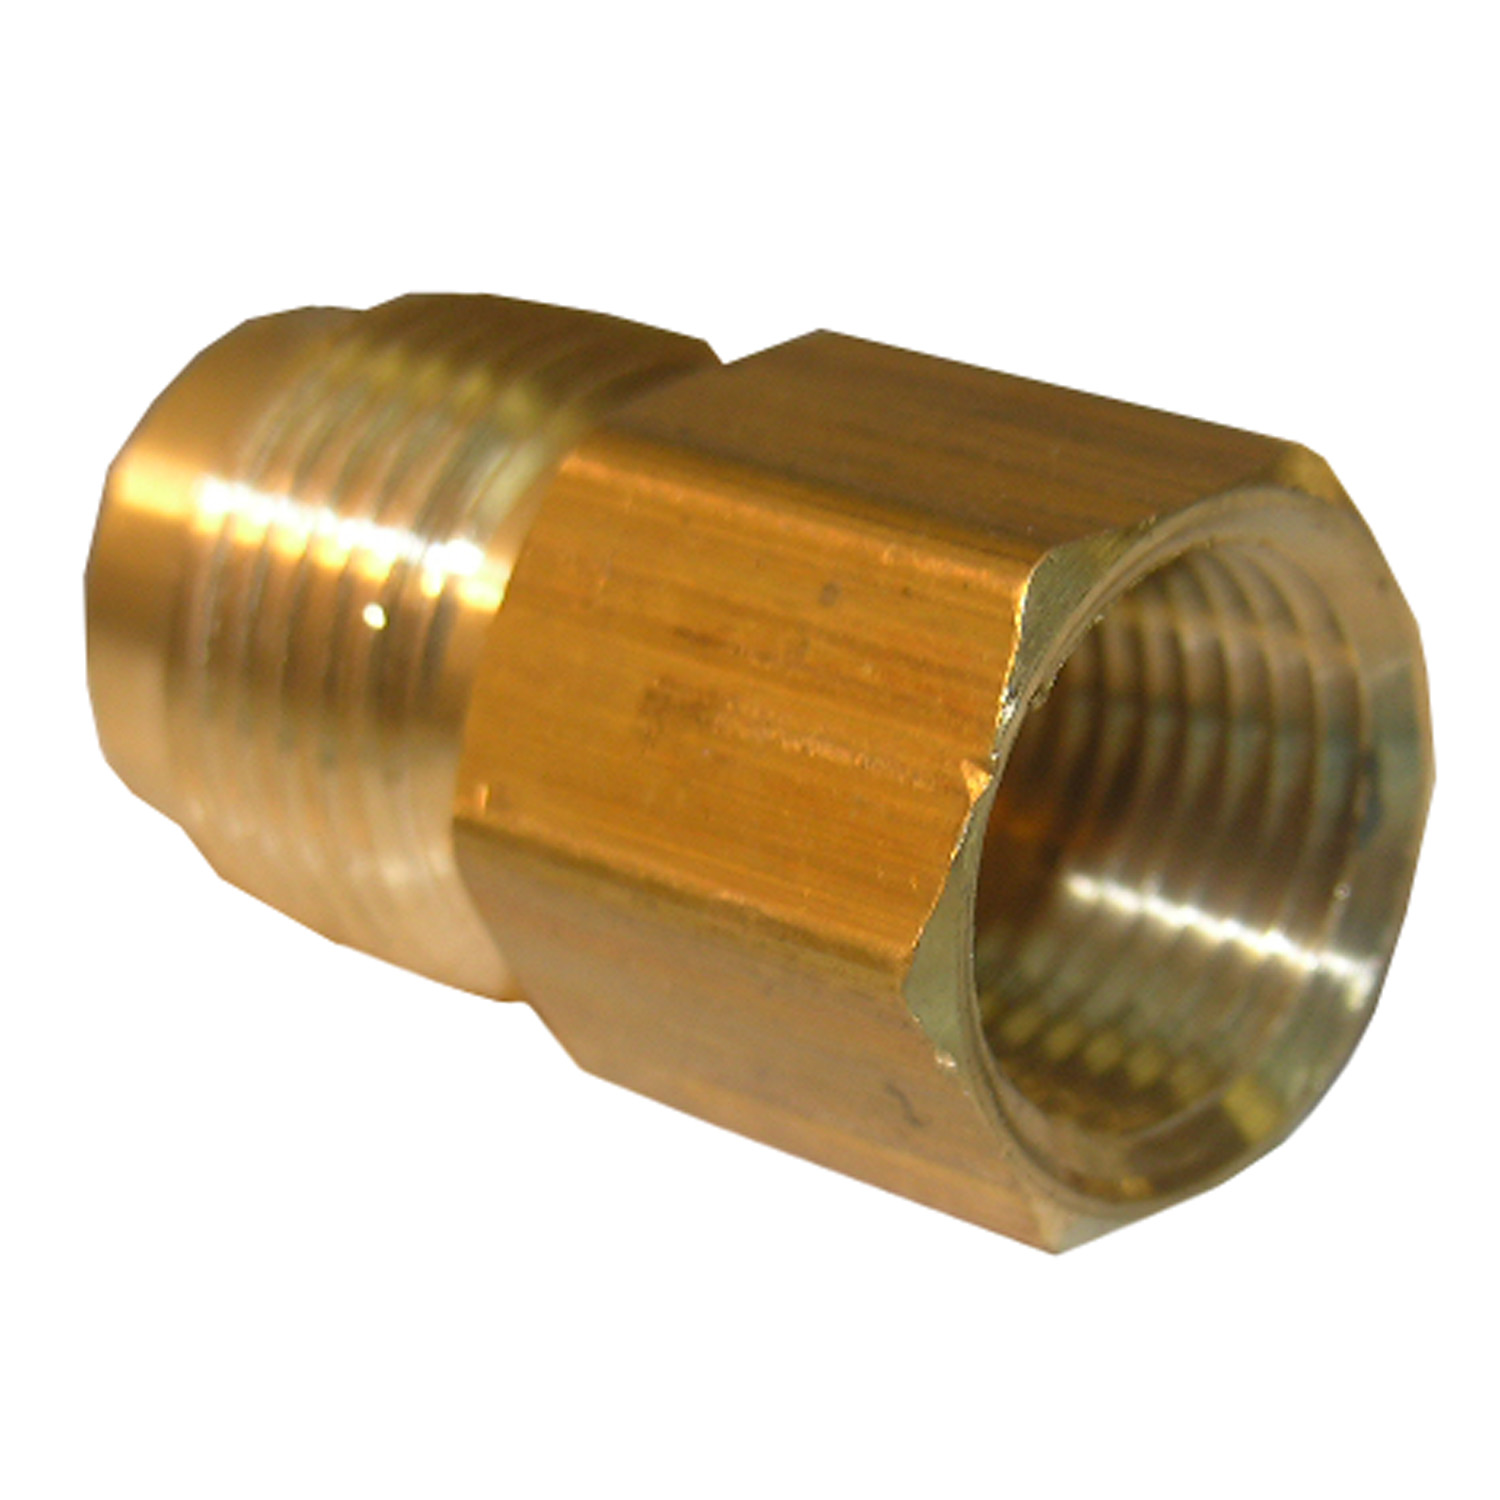 17-4649 Pipe Adapter, 1/2 in, Male Flare x FPT, Brass, 700 psi Pressure